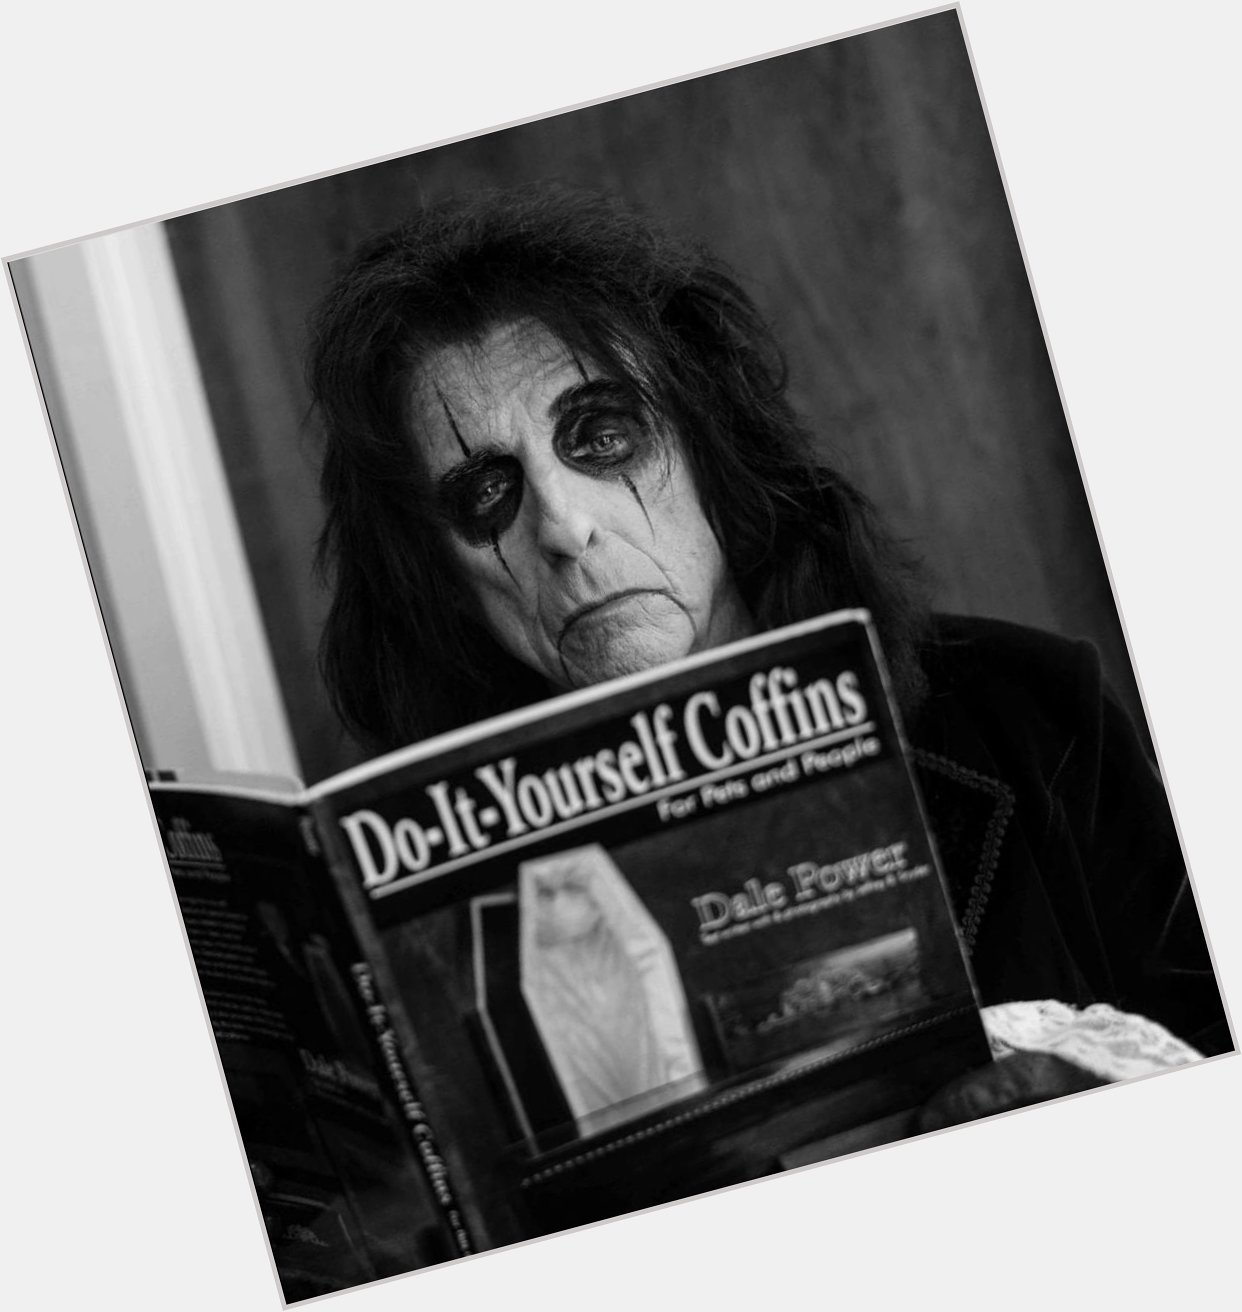 Happy 74 birthday to the one and only Alice Cooper! 